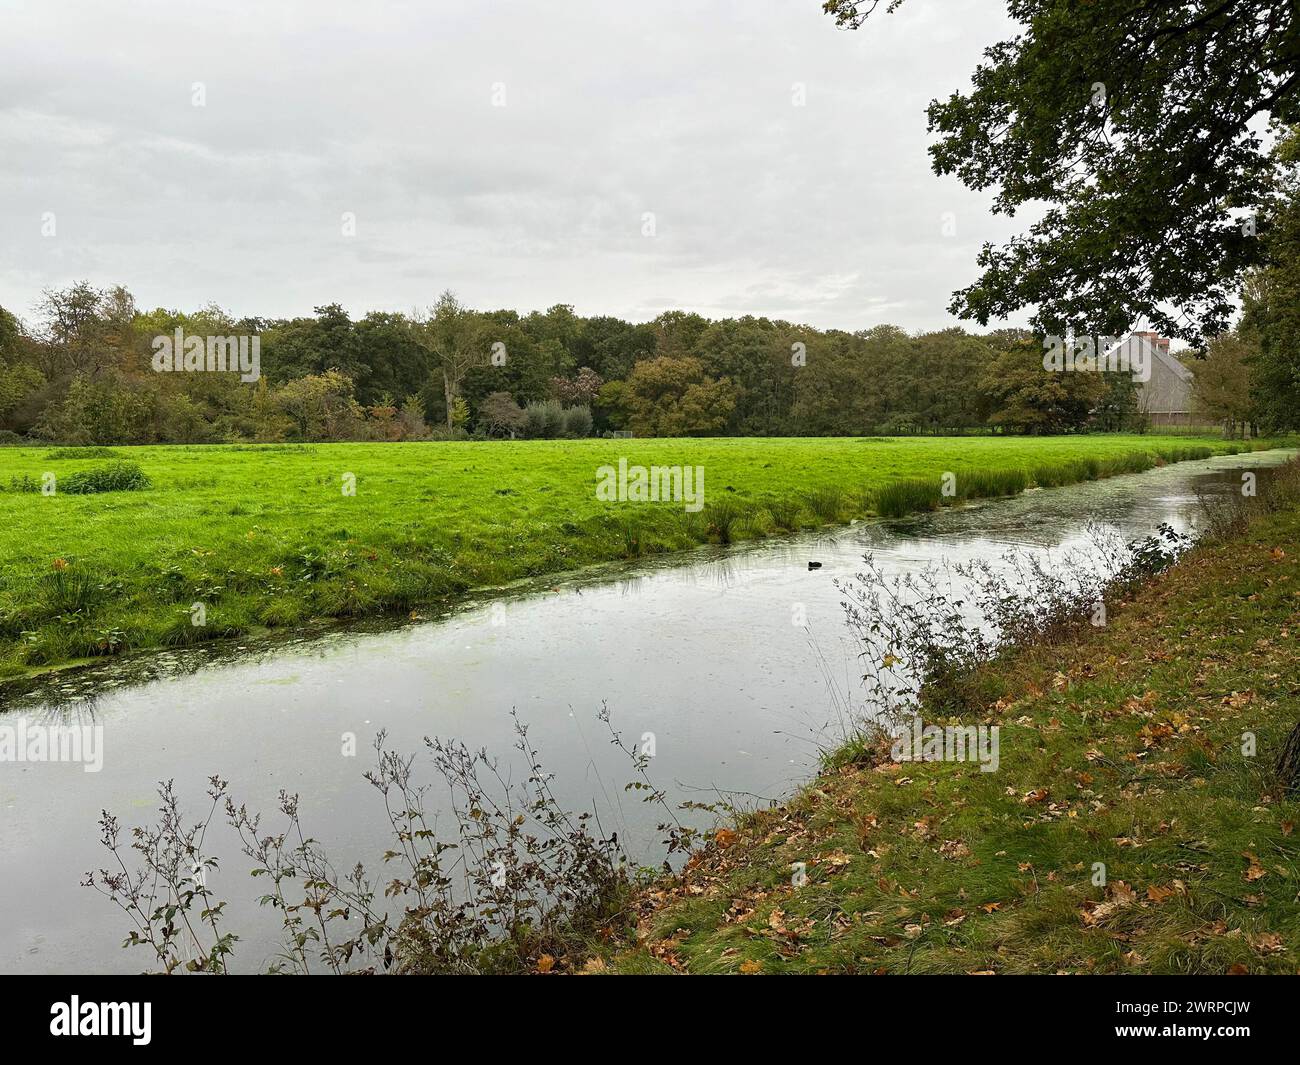 Beautiful trees, green grass and water channel in park Stock Photo